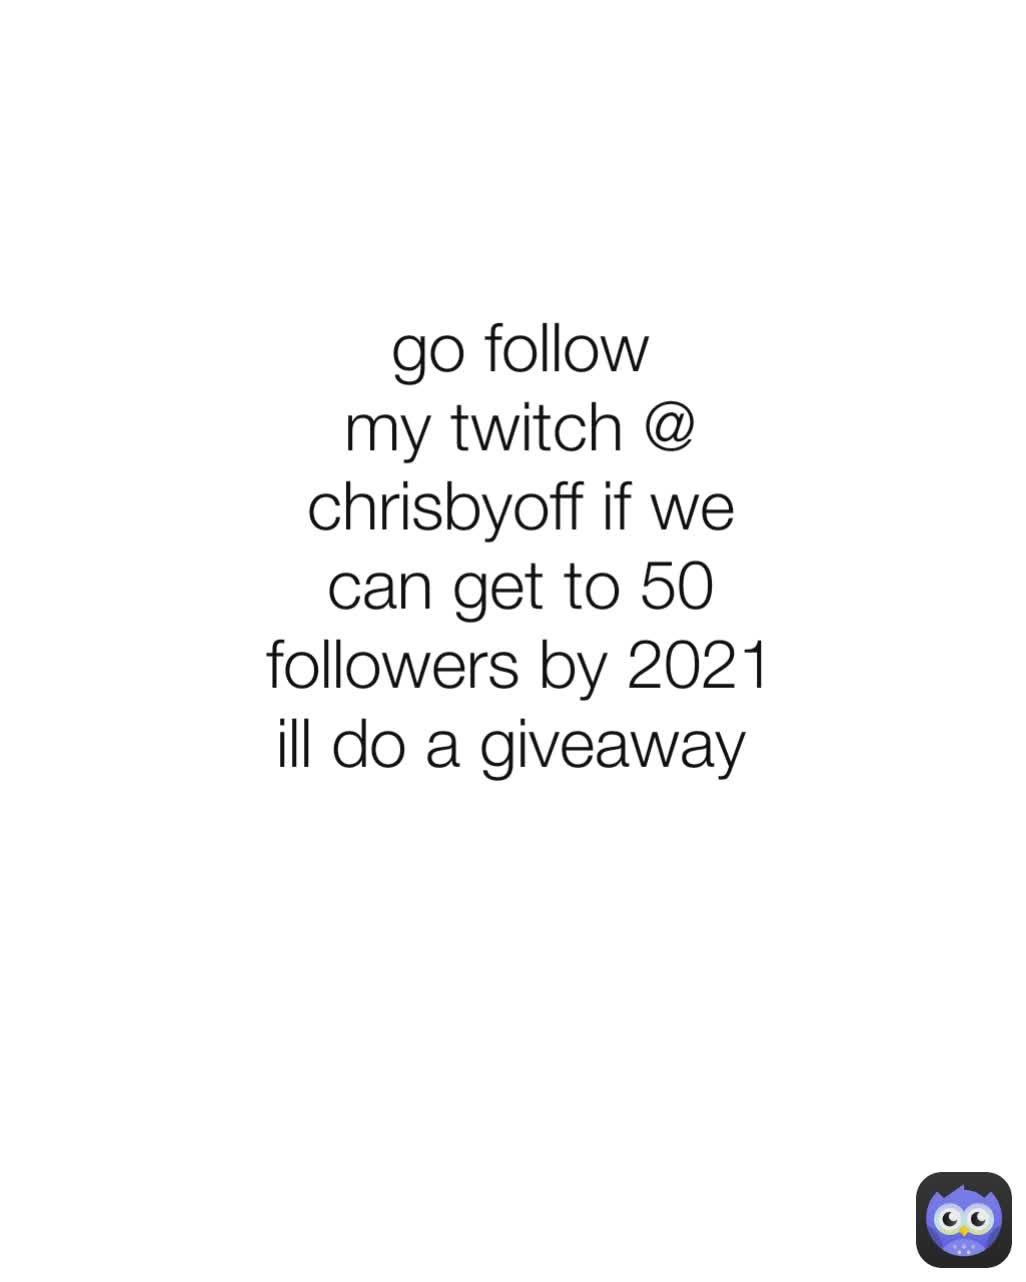 go follow my twitch @ chrisbyoff if we can get to 50 followers by 2021 ill do a giveaway 